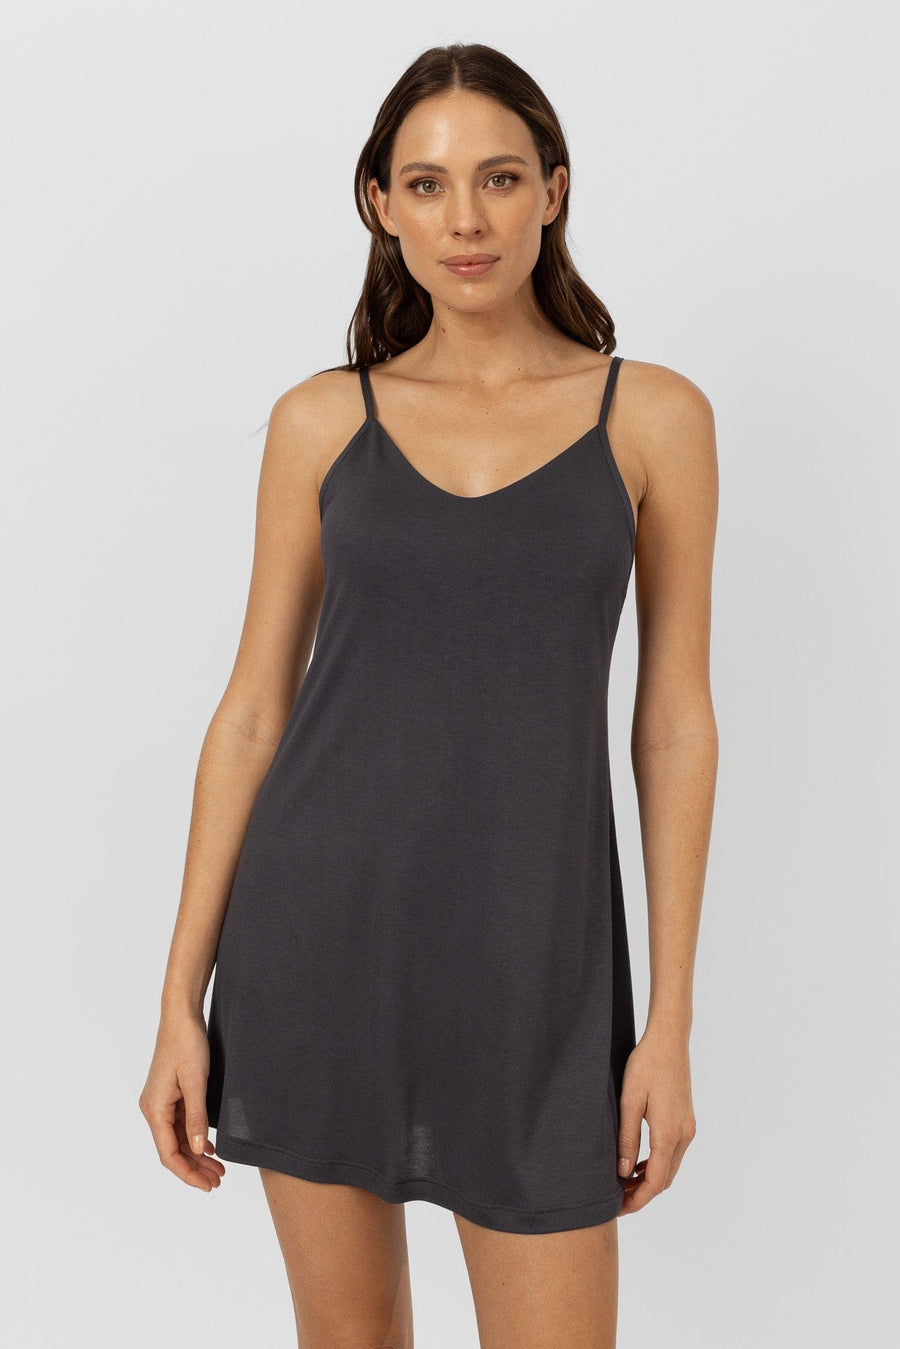 Willow Dress | Graphite Nightgowns Australia Online | Reverie the Label  DRESSES Willow Dress